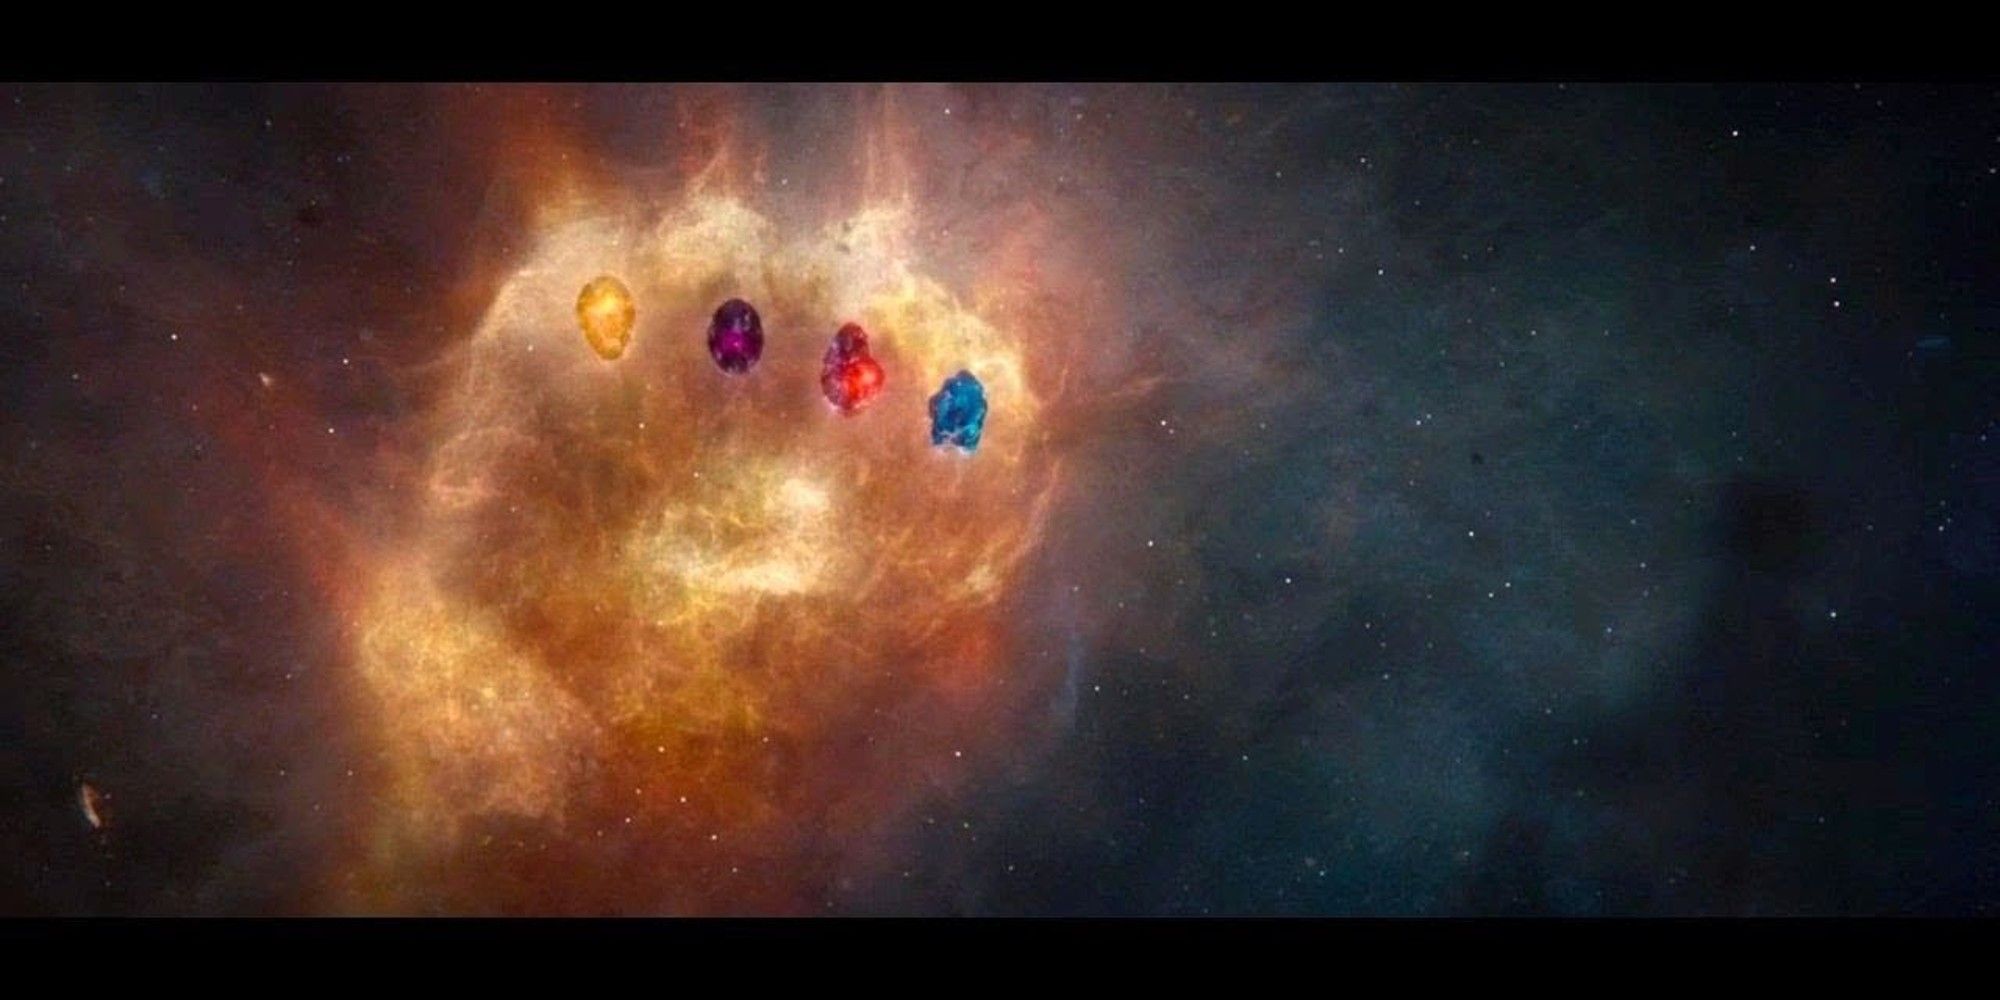 Thor's Vision of Infinity Stones in Age of UItron